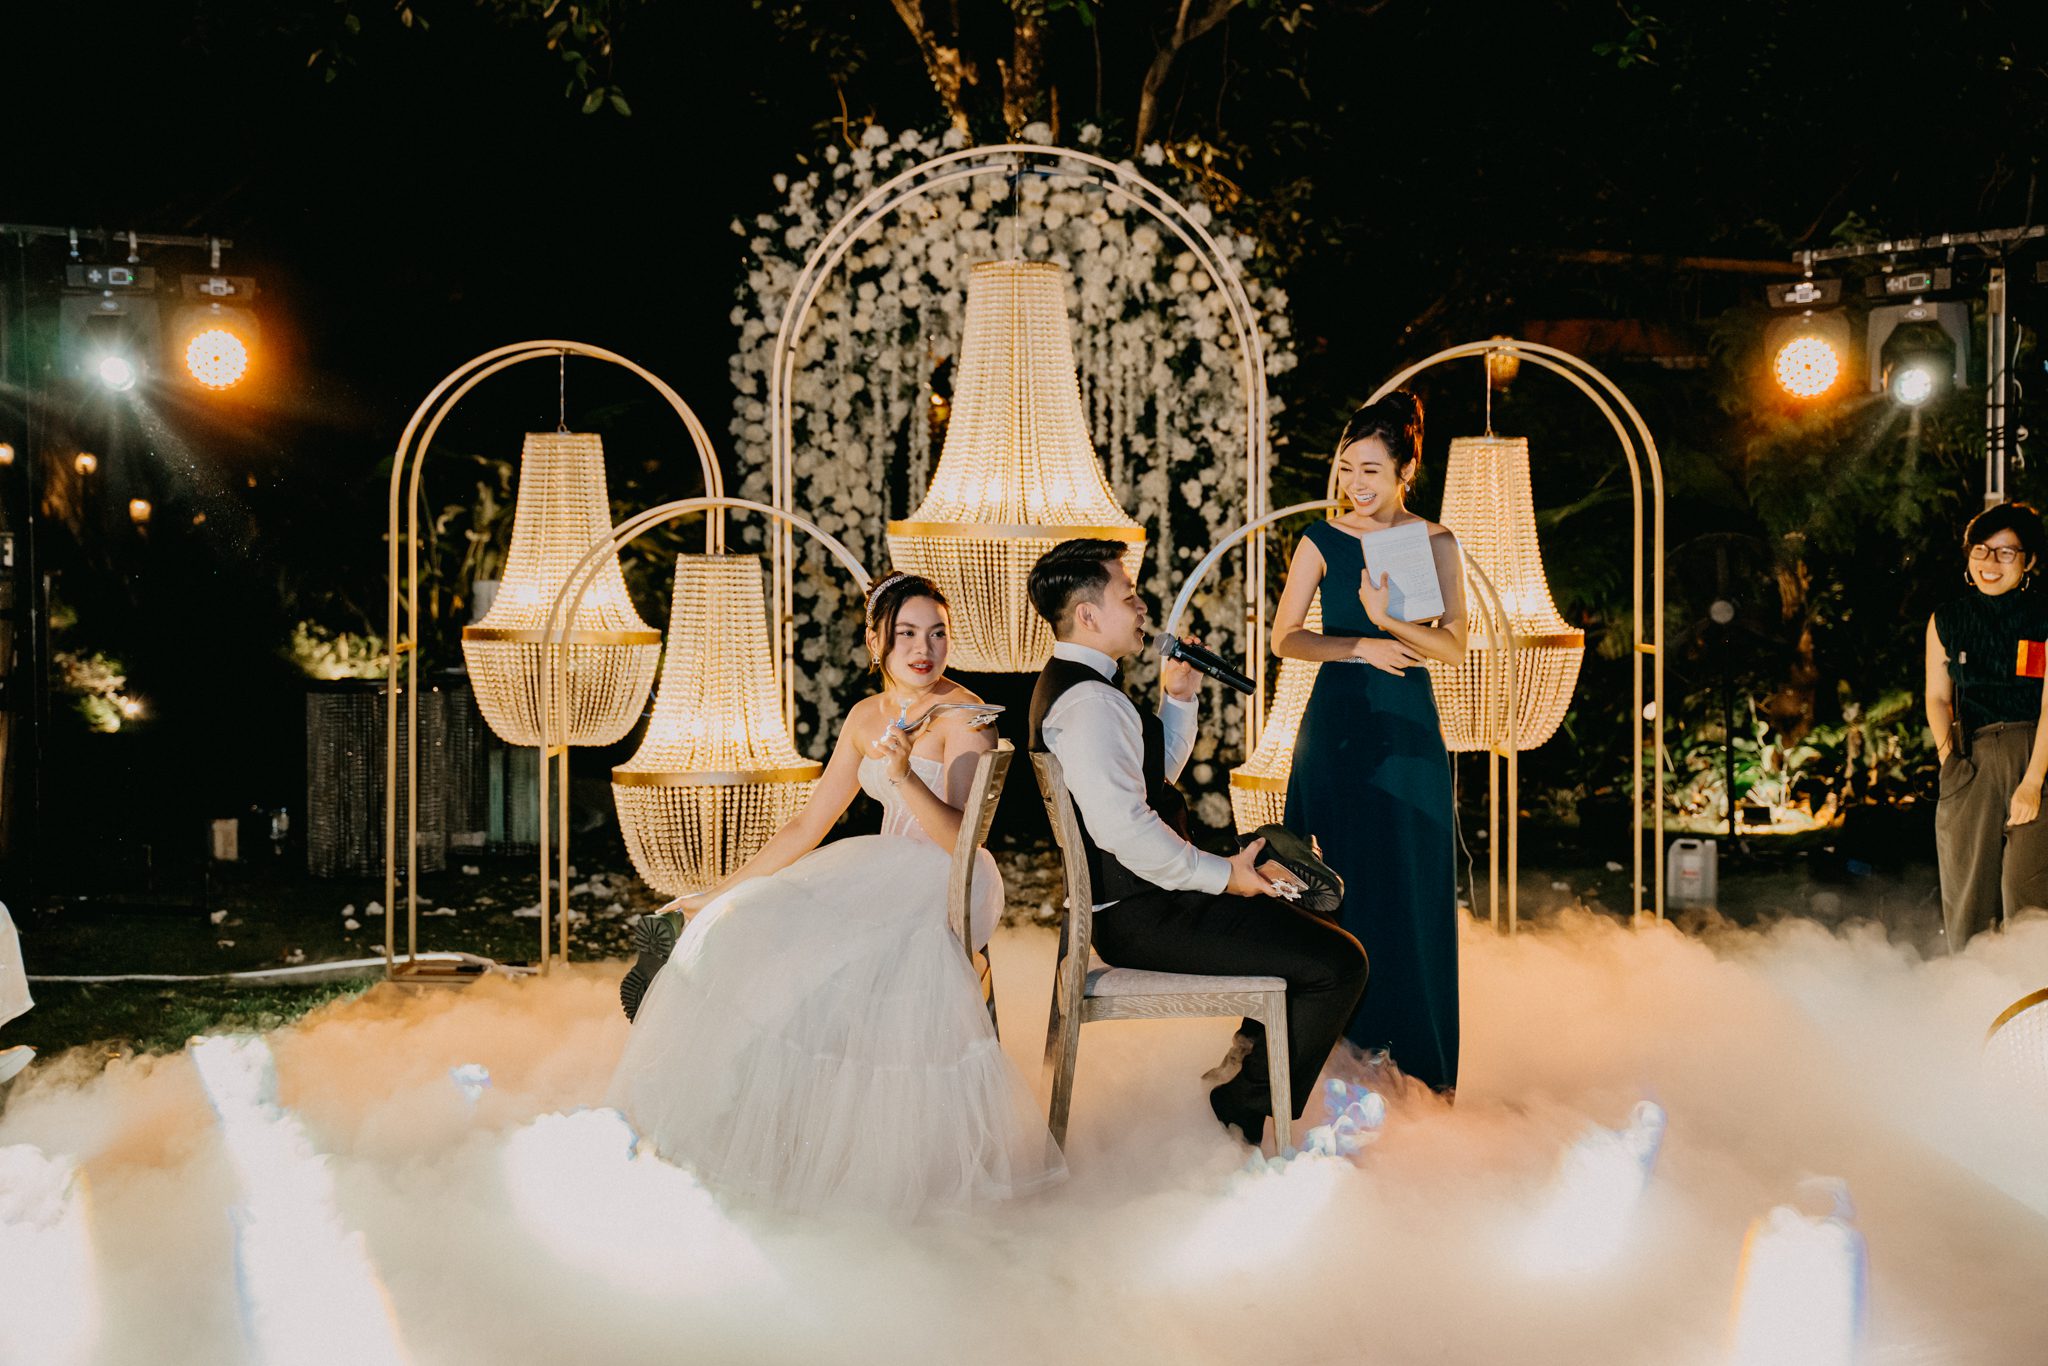 Saigon intimate wedding at An Lam Retreat 01912 - The Planners